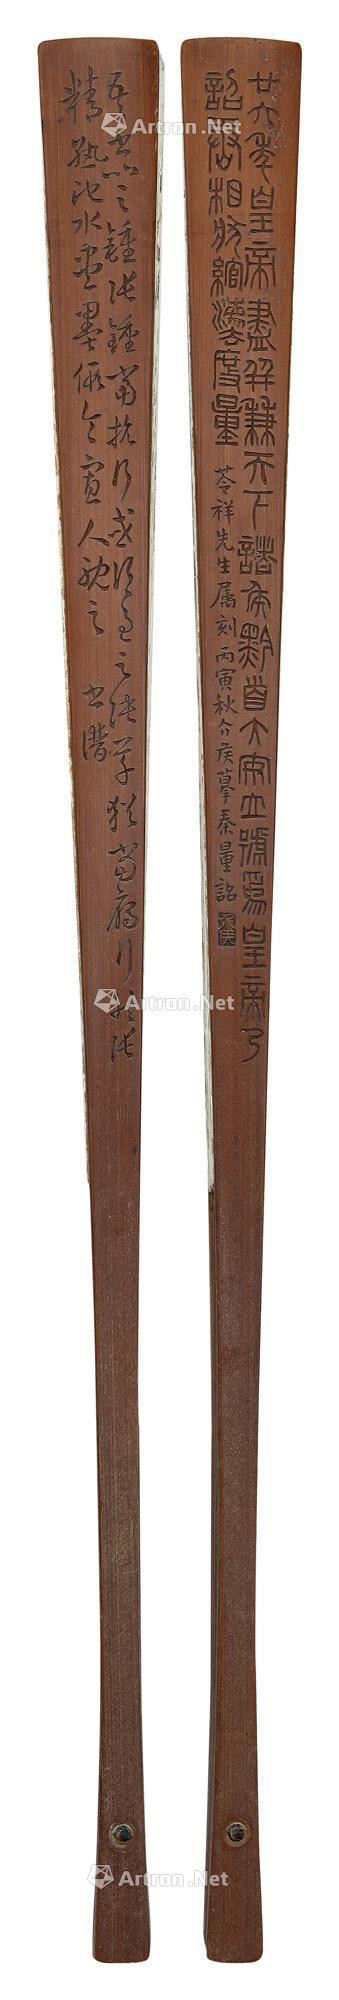 A BAMBOO CARVED‘BRONZE INSCRIPTION AND CALLIGRAPHY IN RUNNING SCRIPT’FAN RIB BY LIN ZHAOLU